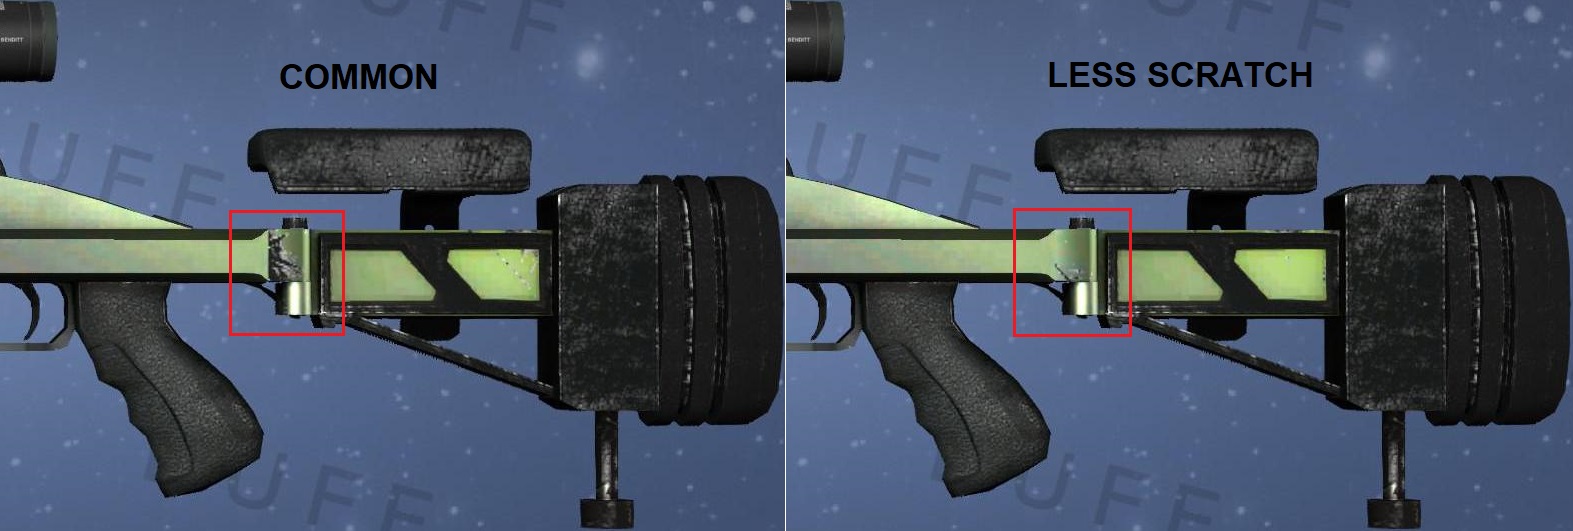 Counter-Strike: Global Offensive SSG 08 Acid Fade Rare Pattern Guide - Less Scratched Patterns - CF0F069